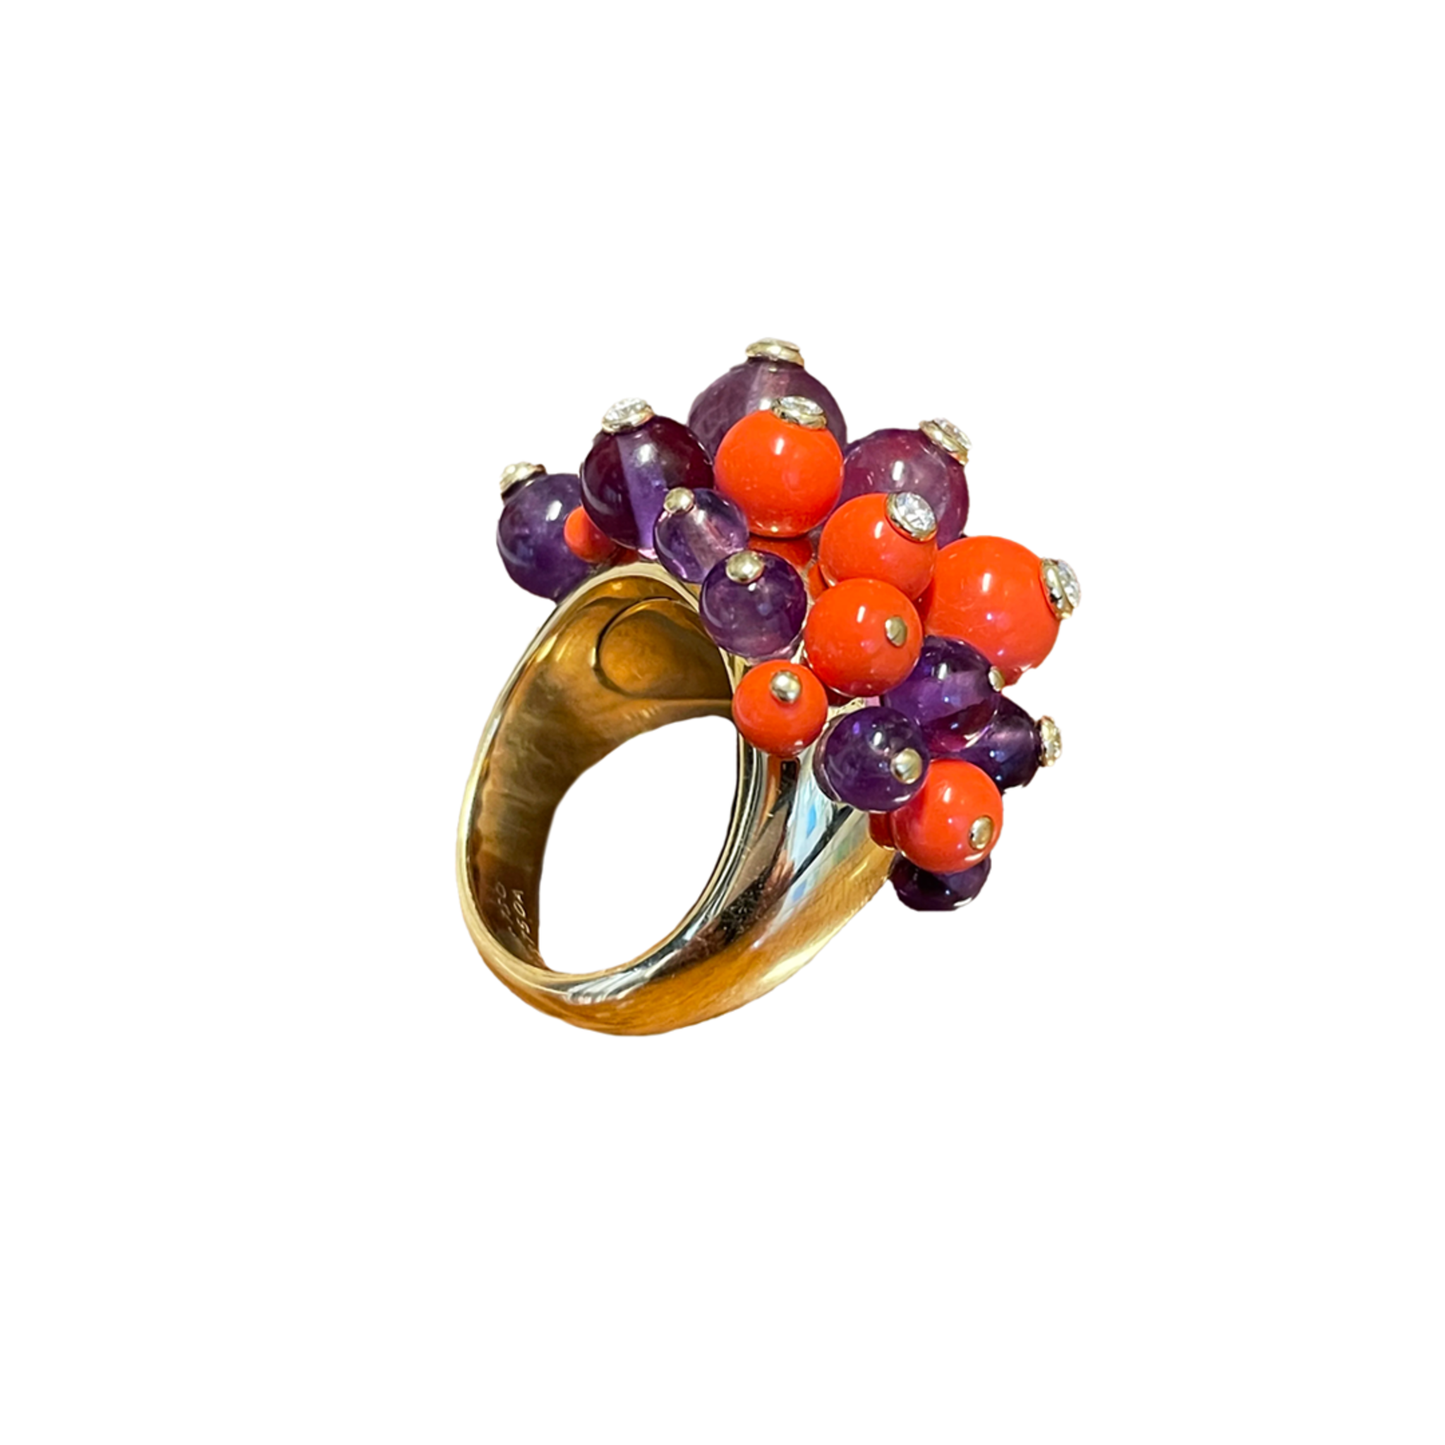 Cartier France 1970s 18KT Yellow Gold Coral, Amethyst & Diamond Pom-Pom Ring Side